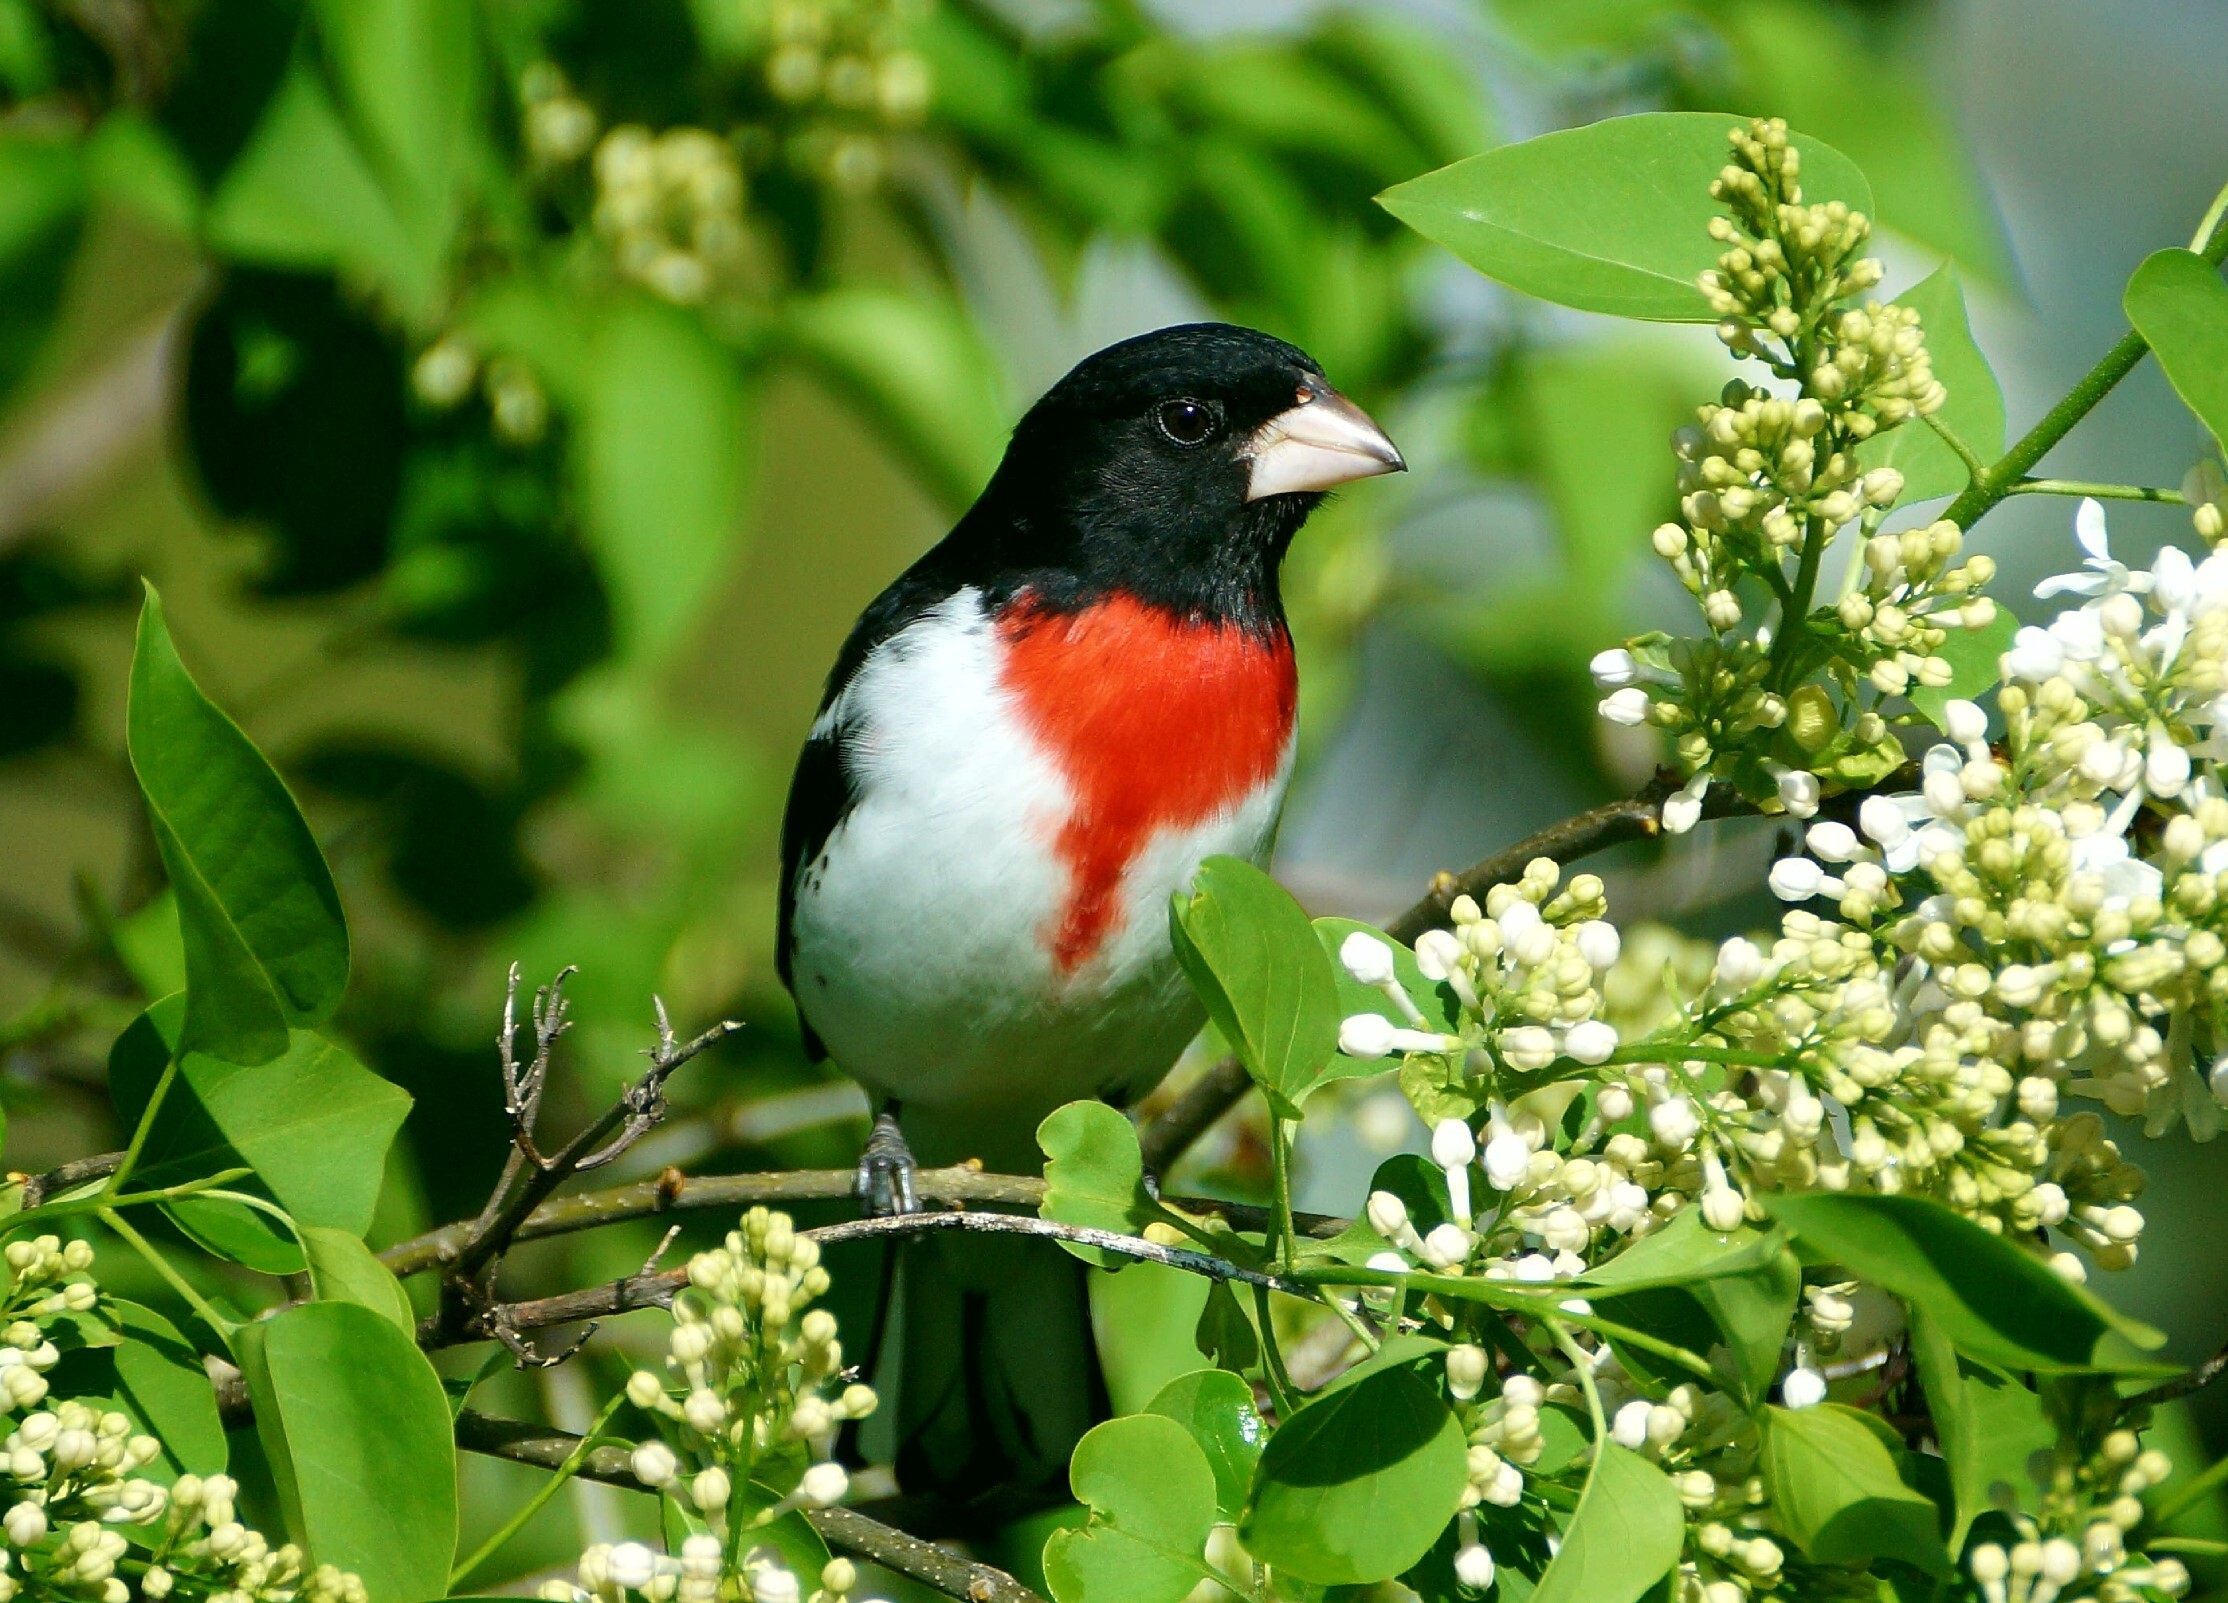 A male Rose-breasted Grosbeak perches among lilac blooms. Photo: Kristine Olson/Audubon Photography Awards